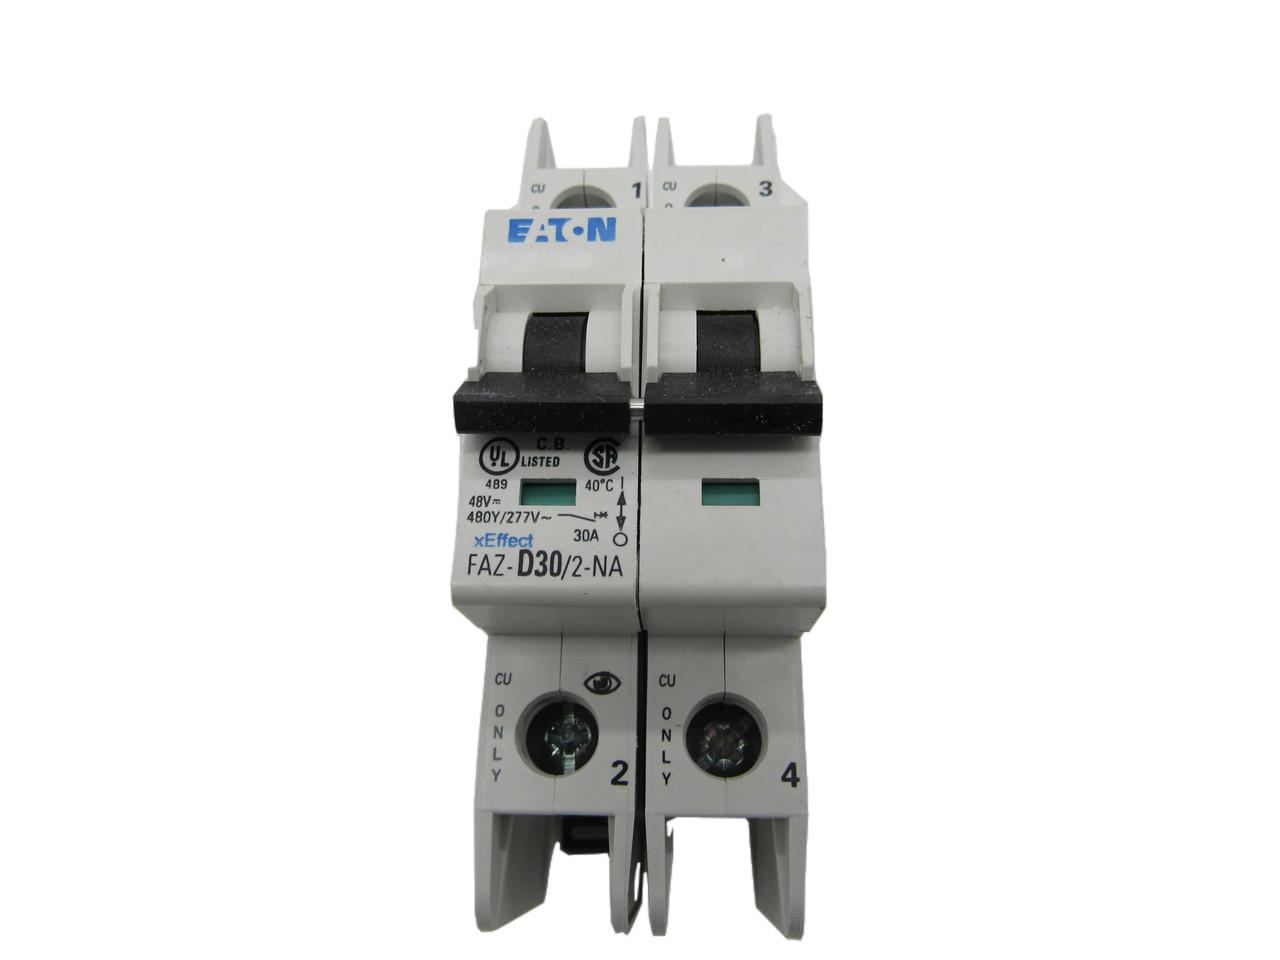 Eaton FAZ-D30/2-NA 277/480 VAC 50/60 Hz, 30 A, 2-Pole, 10/14 kA, 10 to 20 x Rated Current, Screw Terminal, DIN Rail Mount, Standard Packaging, D-Curve, Current Limiting, Thermal Magnetic